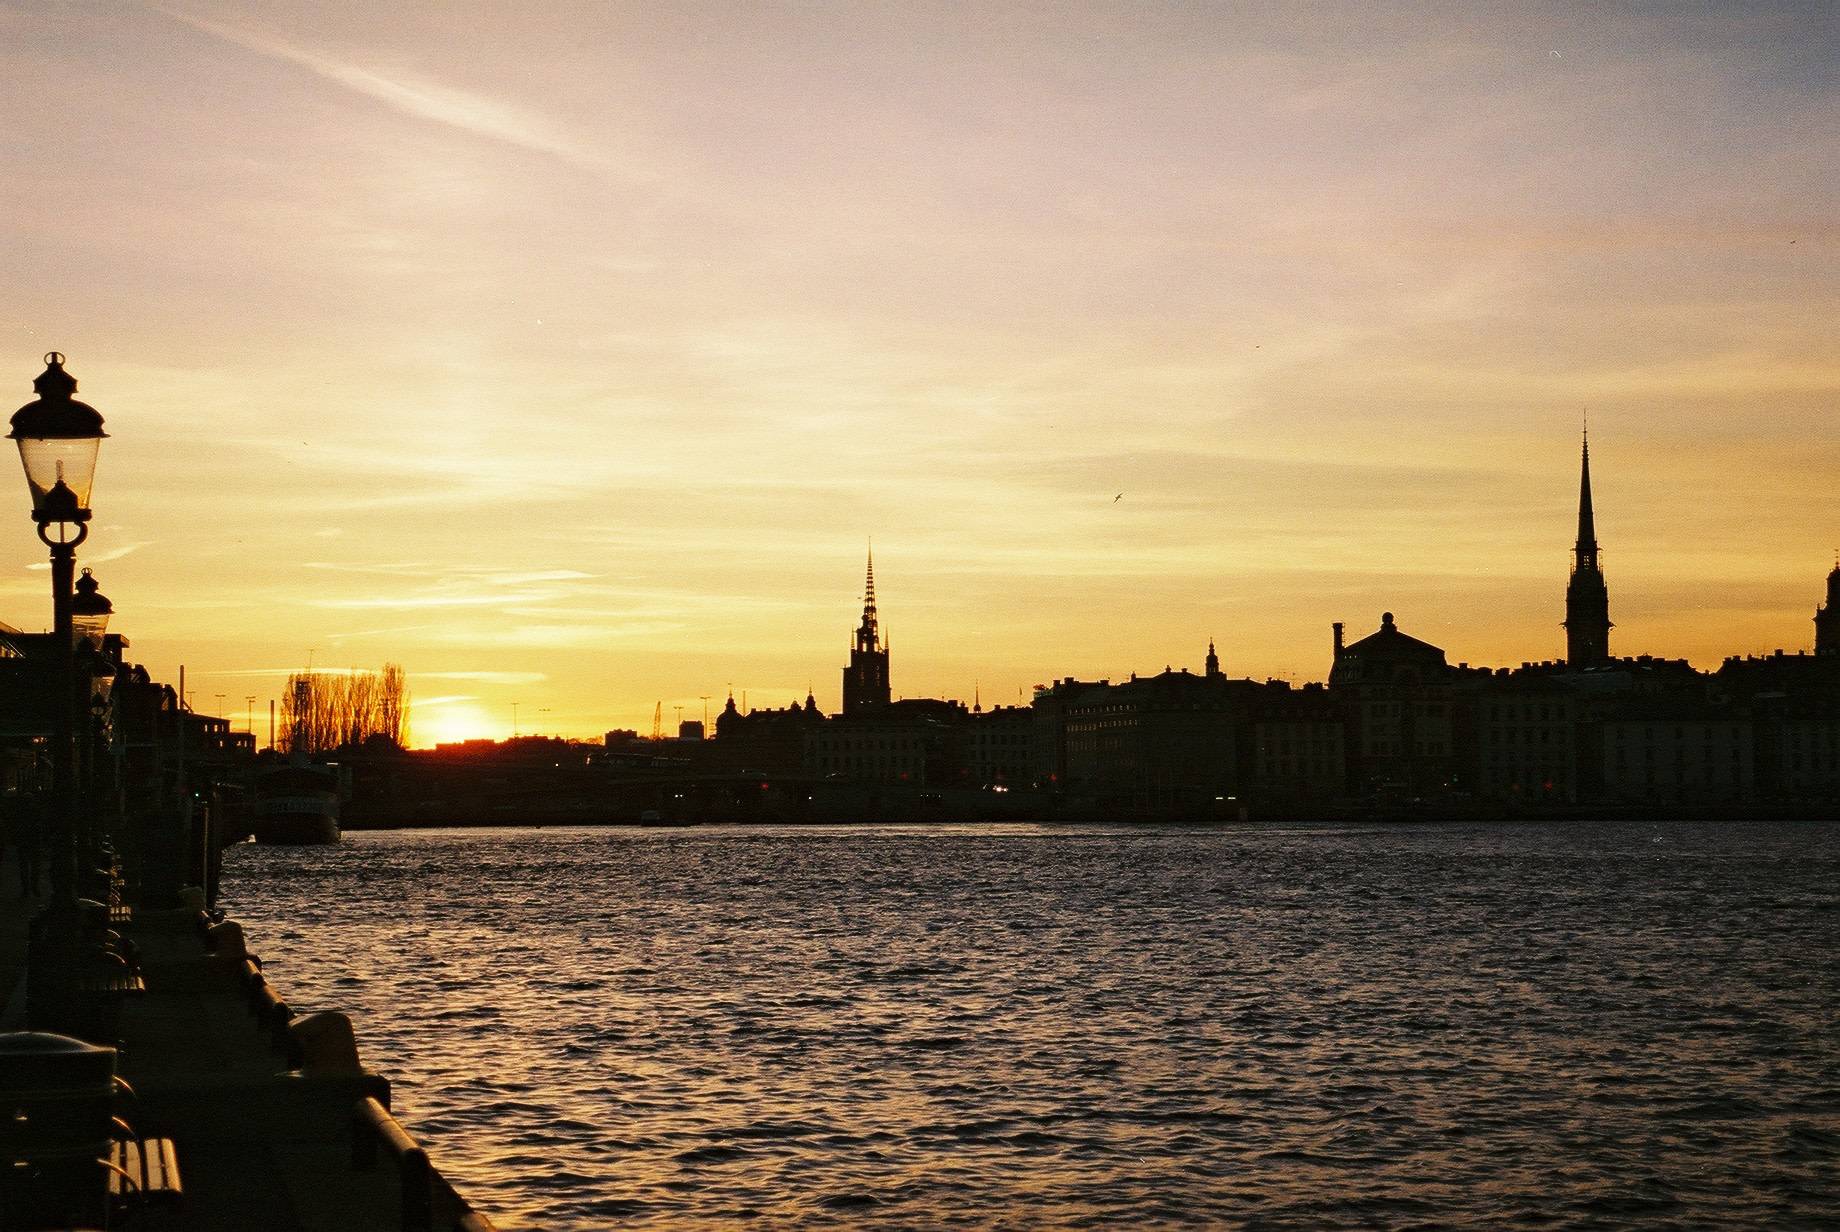 view of the river and the silhouette of the city skyline just before the sunset